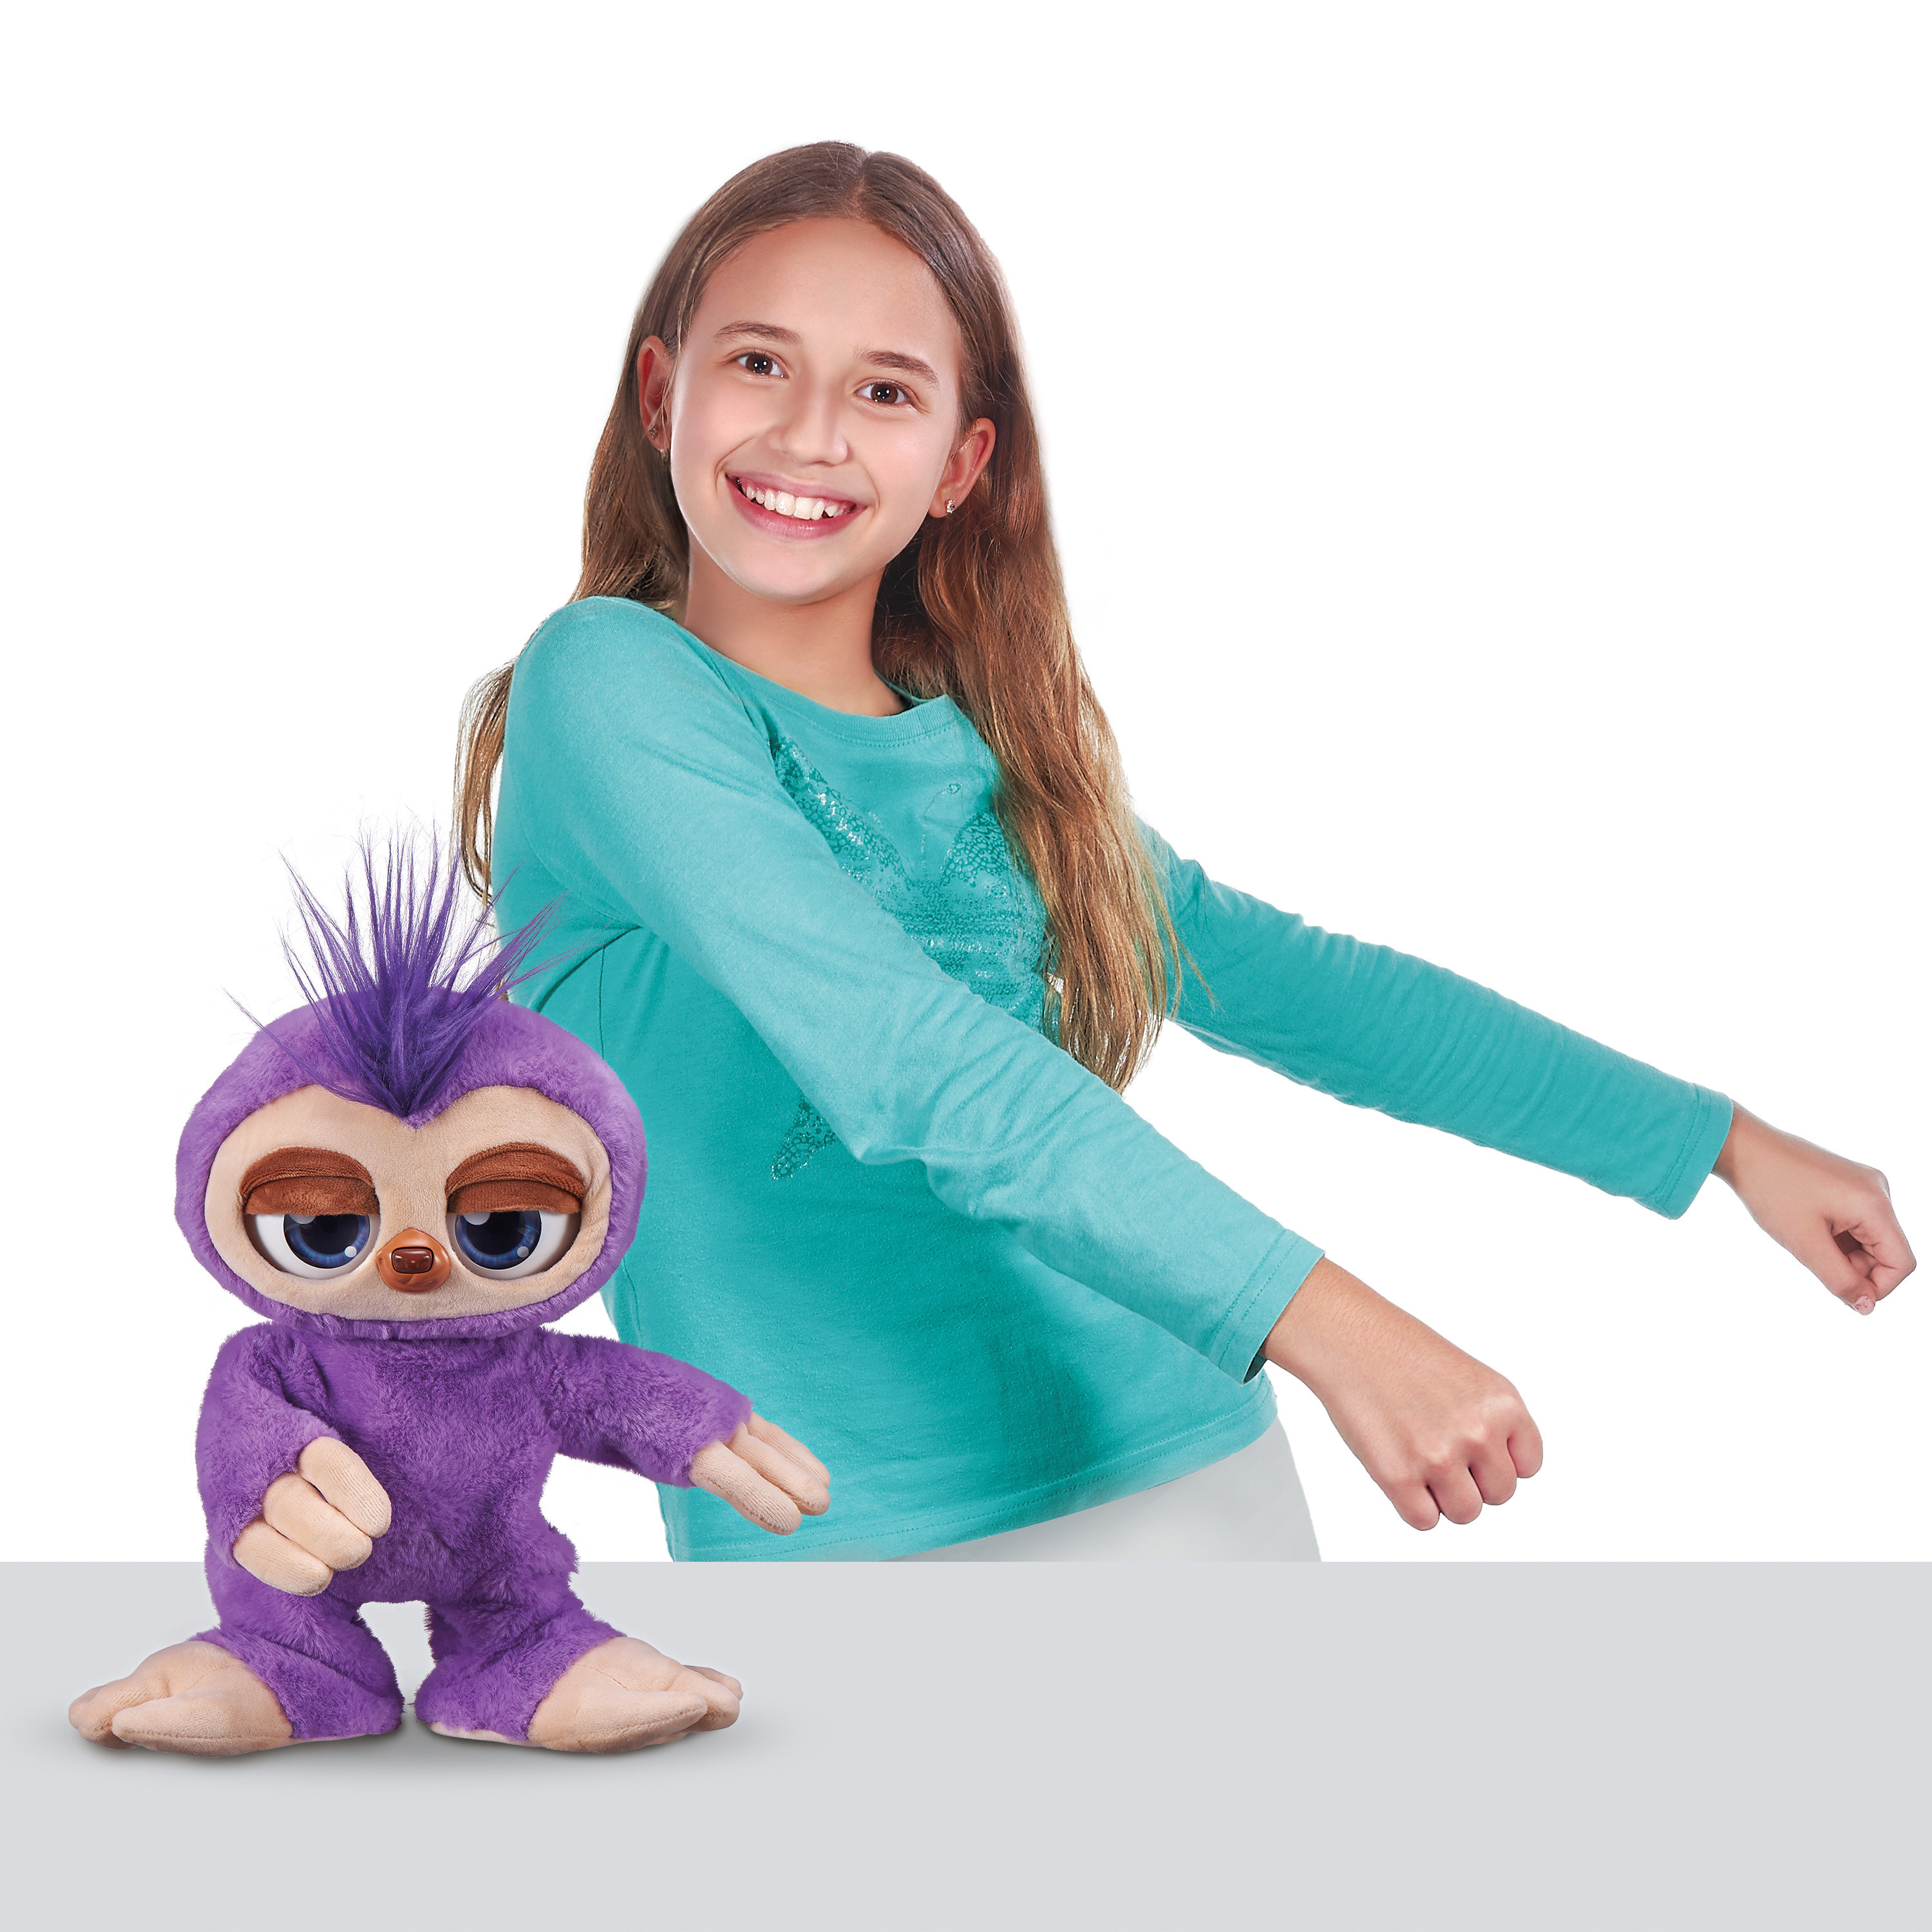 child flossing while a purple flossing doll dances and moves